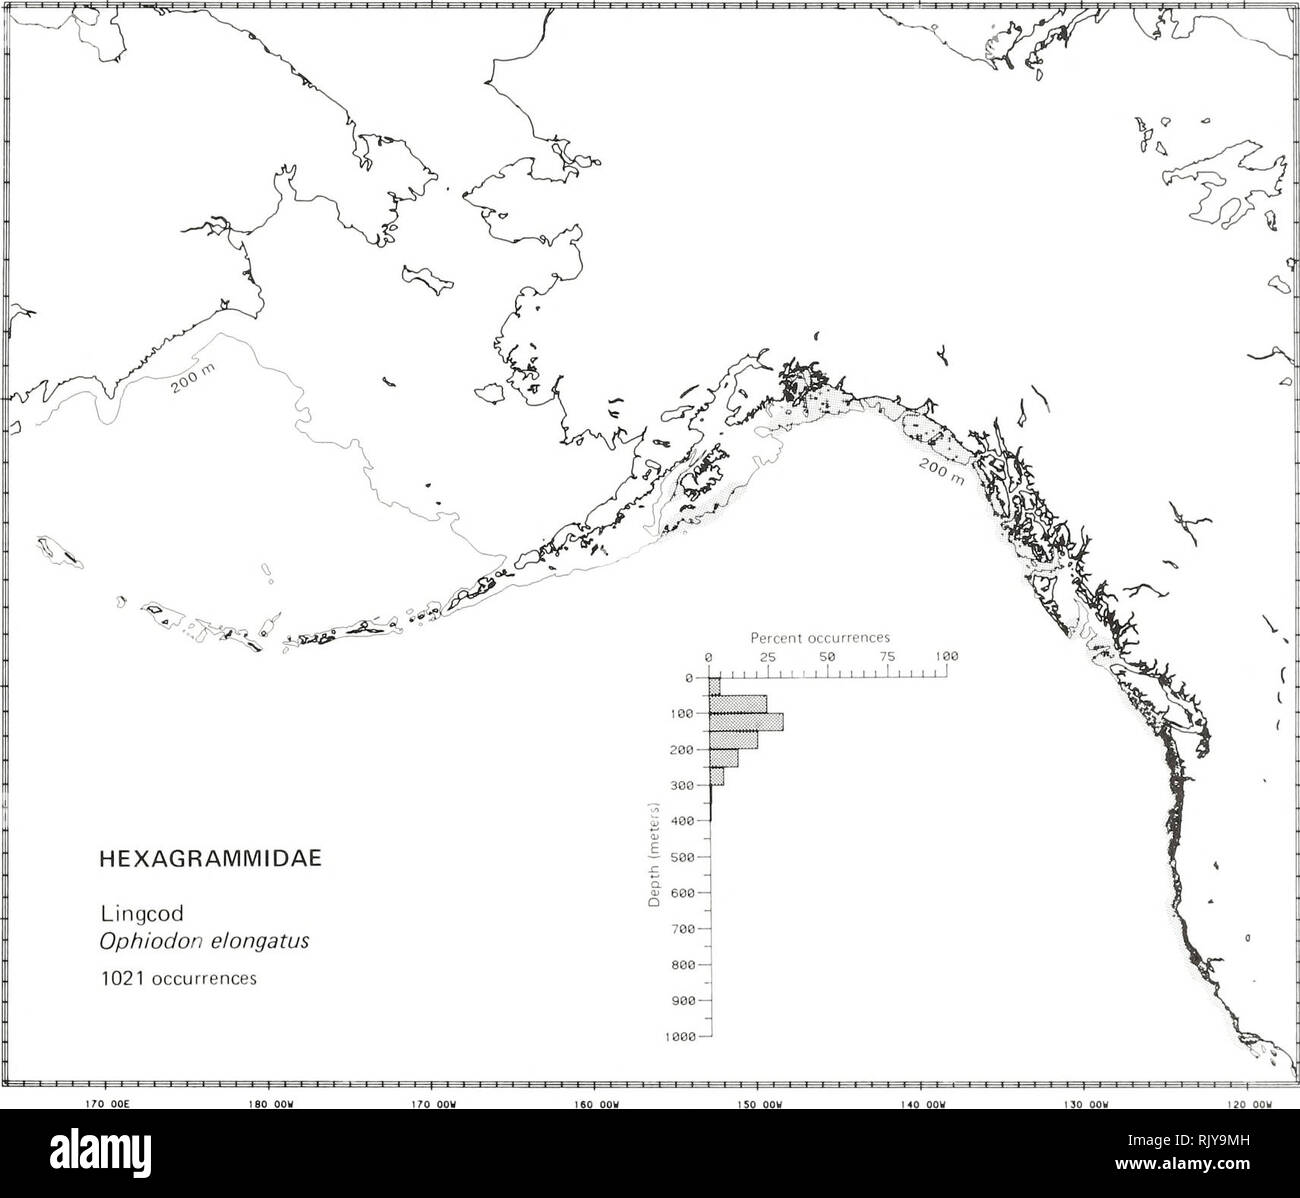 . Atlas and zoogeography of common fishes in the Bering Sea and Northeastern Pacific / M. James Allen, Gary B. Smith. Fishes Bering Sea Geographical distribution.. LINGCOD, Ophiodon elongatus Girard 1854 Hexagrammidae: Greenlings Literature Reported from the Shumagin Islands in the western Gulf of Alaska (and possibly the Bering Sea) to Ensenada, Baja Califor- nia (Quast and Hall 1972; Hart 1973), and in depth from the intertidal zone to 427 m (Howe 1981; Garrison and Miller 1982; Eschmeyer and Herald 1983). Survey data Found from southwest of Chirikof Island (south of Shelikof Strait) in the  Stock Photo